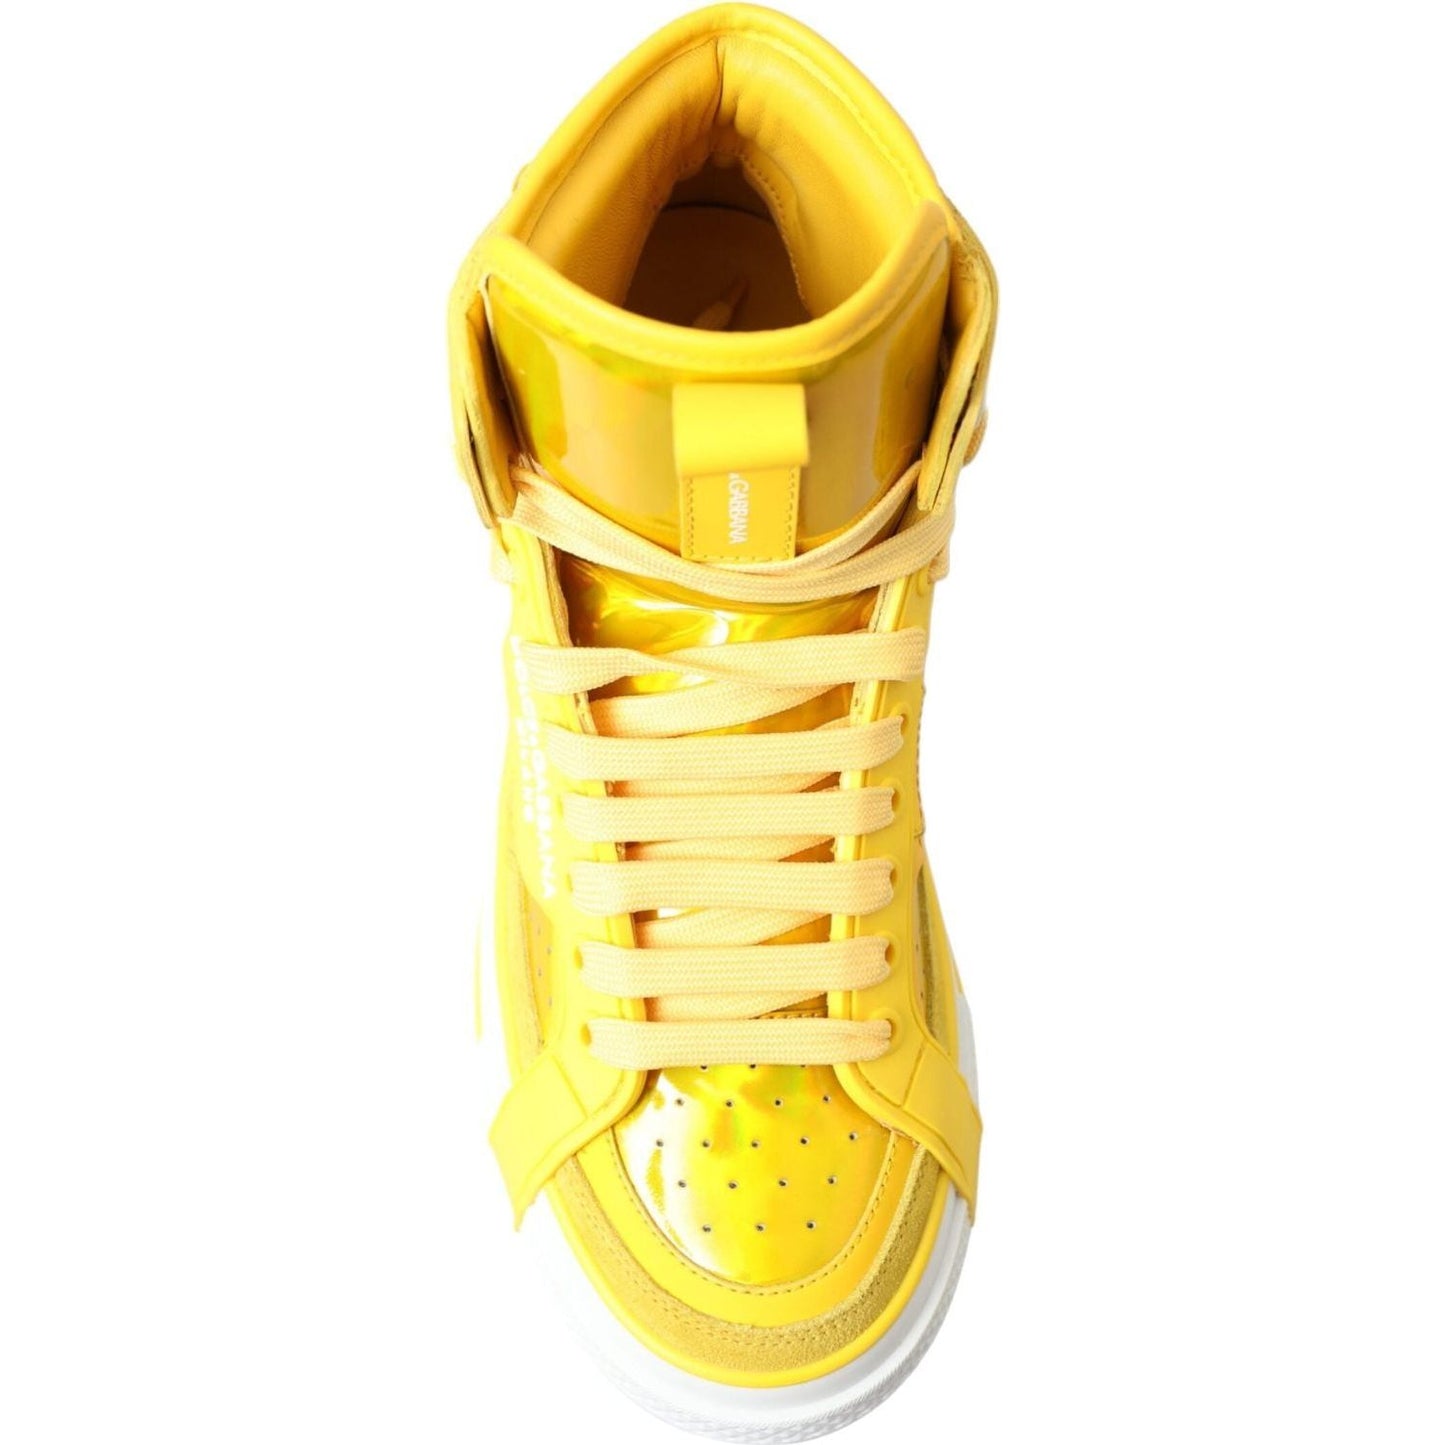 Dolce & Gabbana Chic High-Top Color-Block Sneakers yellow-white-leather-high-top-sneakers-shoes 465A2116-BG-scaled-55e25183-962.jpg